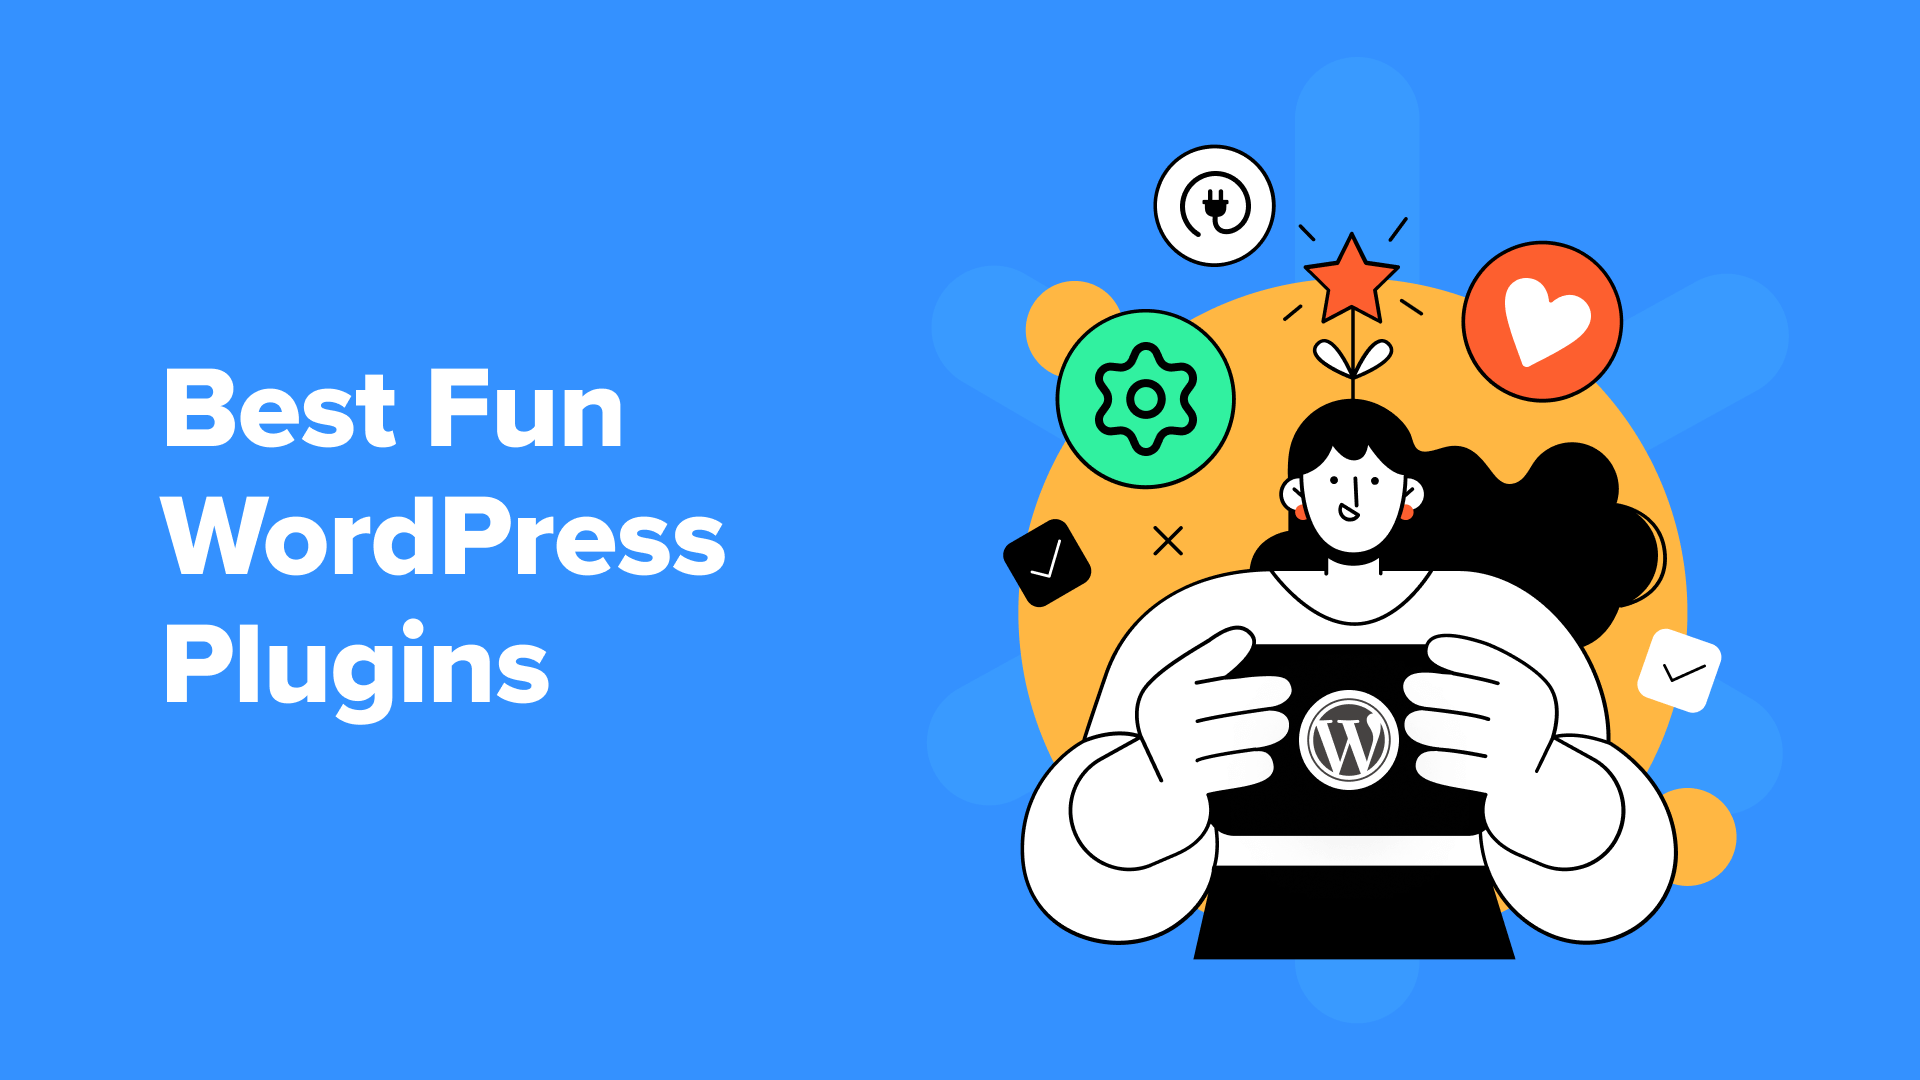 13-best-fun-wordpress-plugins-you’re-missing-out-on